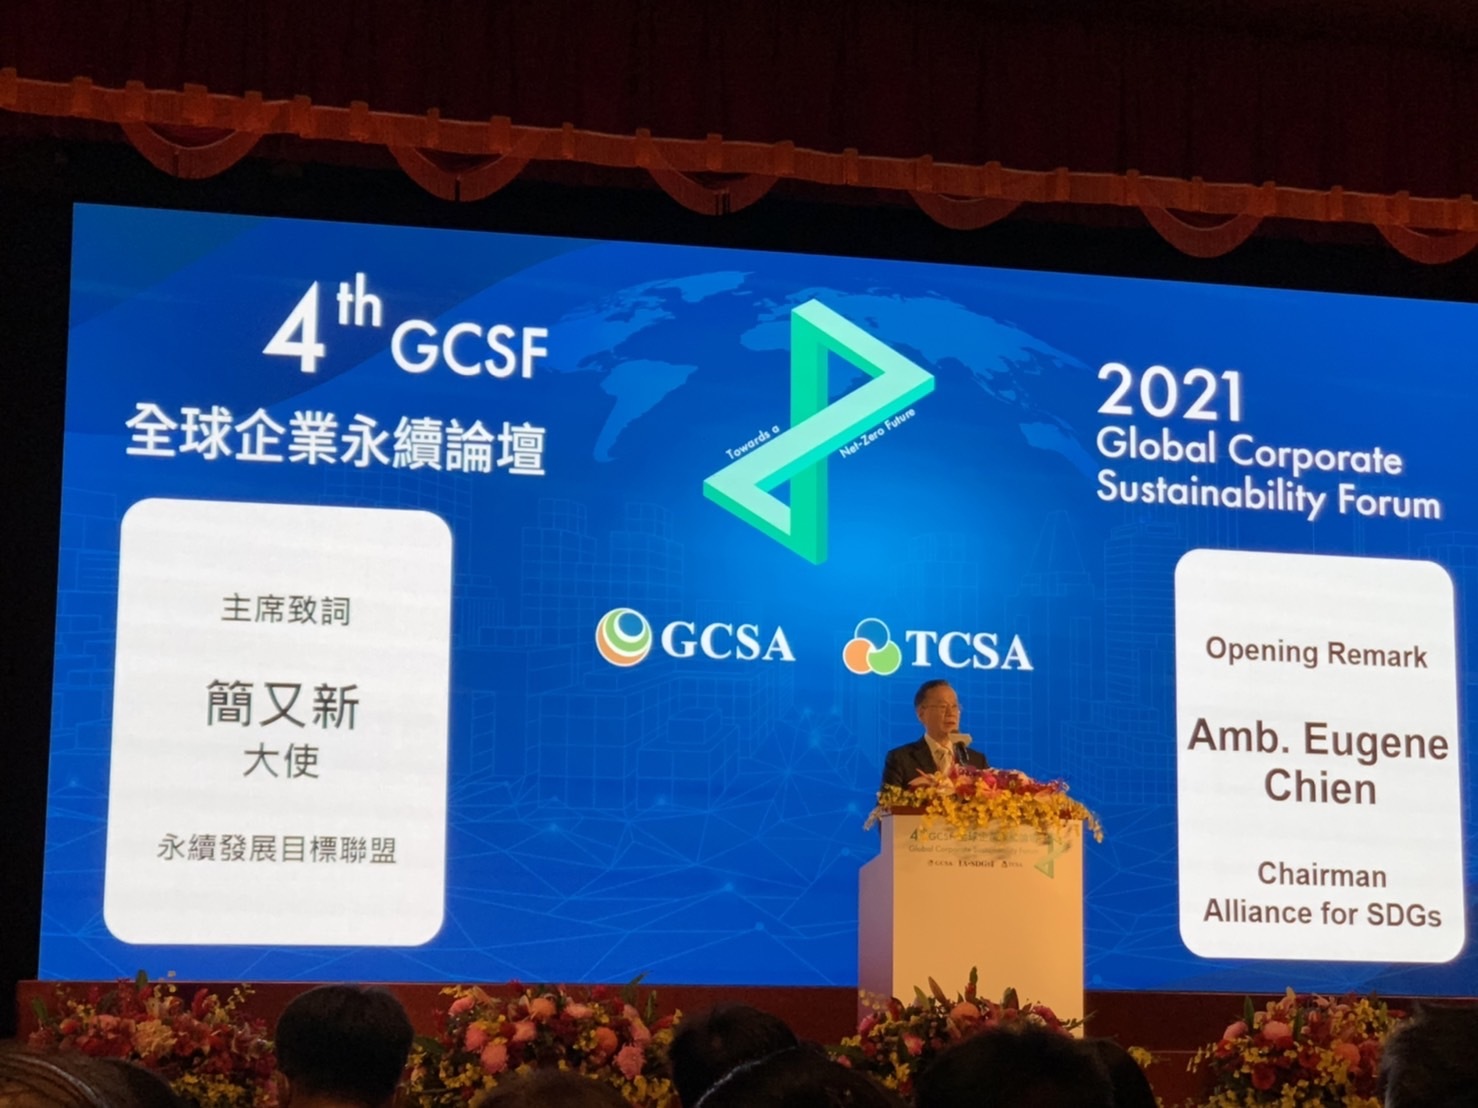 Chairman of Taiwan Institute for Sustainable Energy Eugene Chien gave a speech.